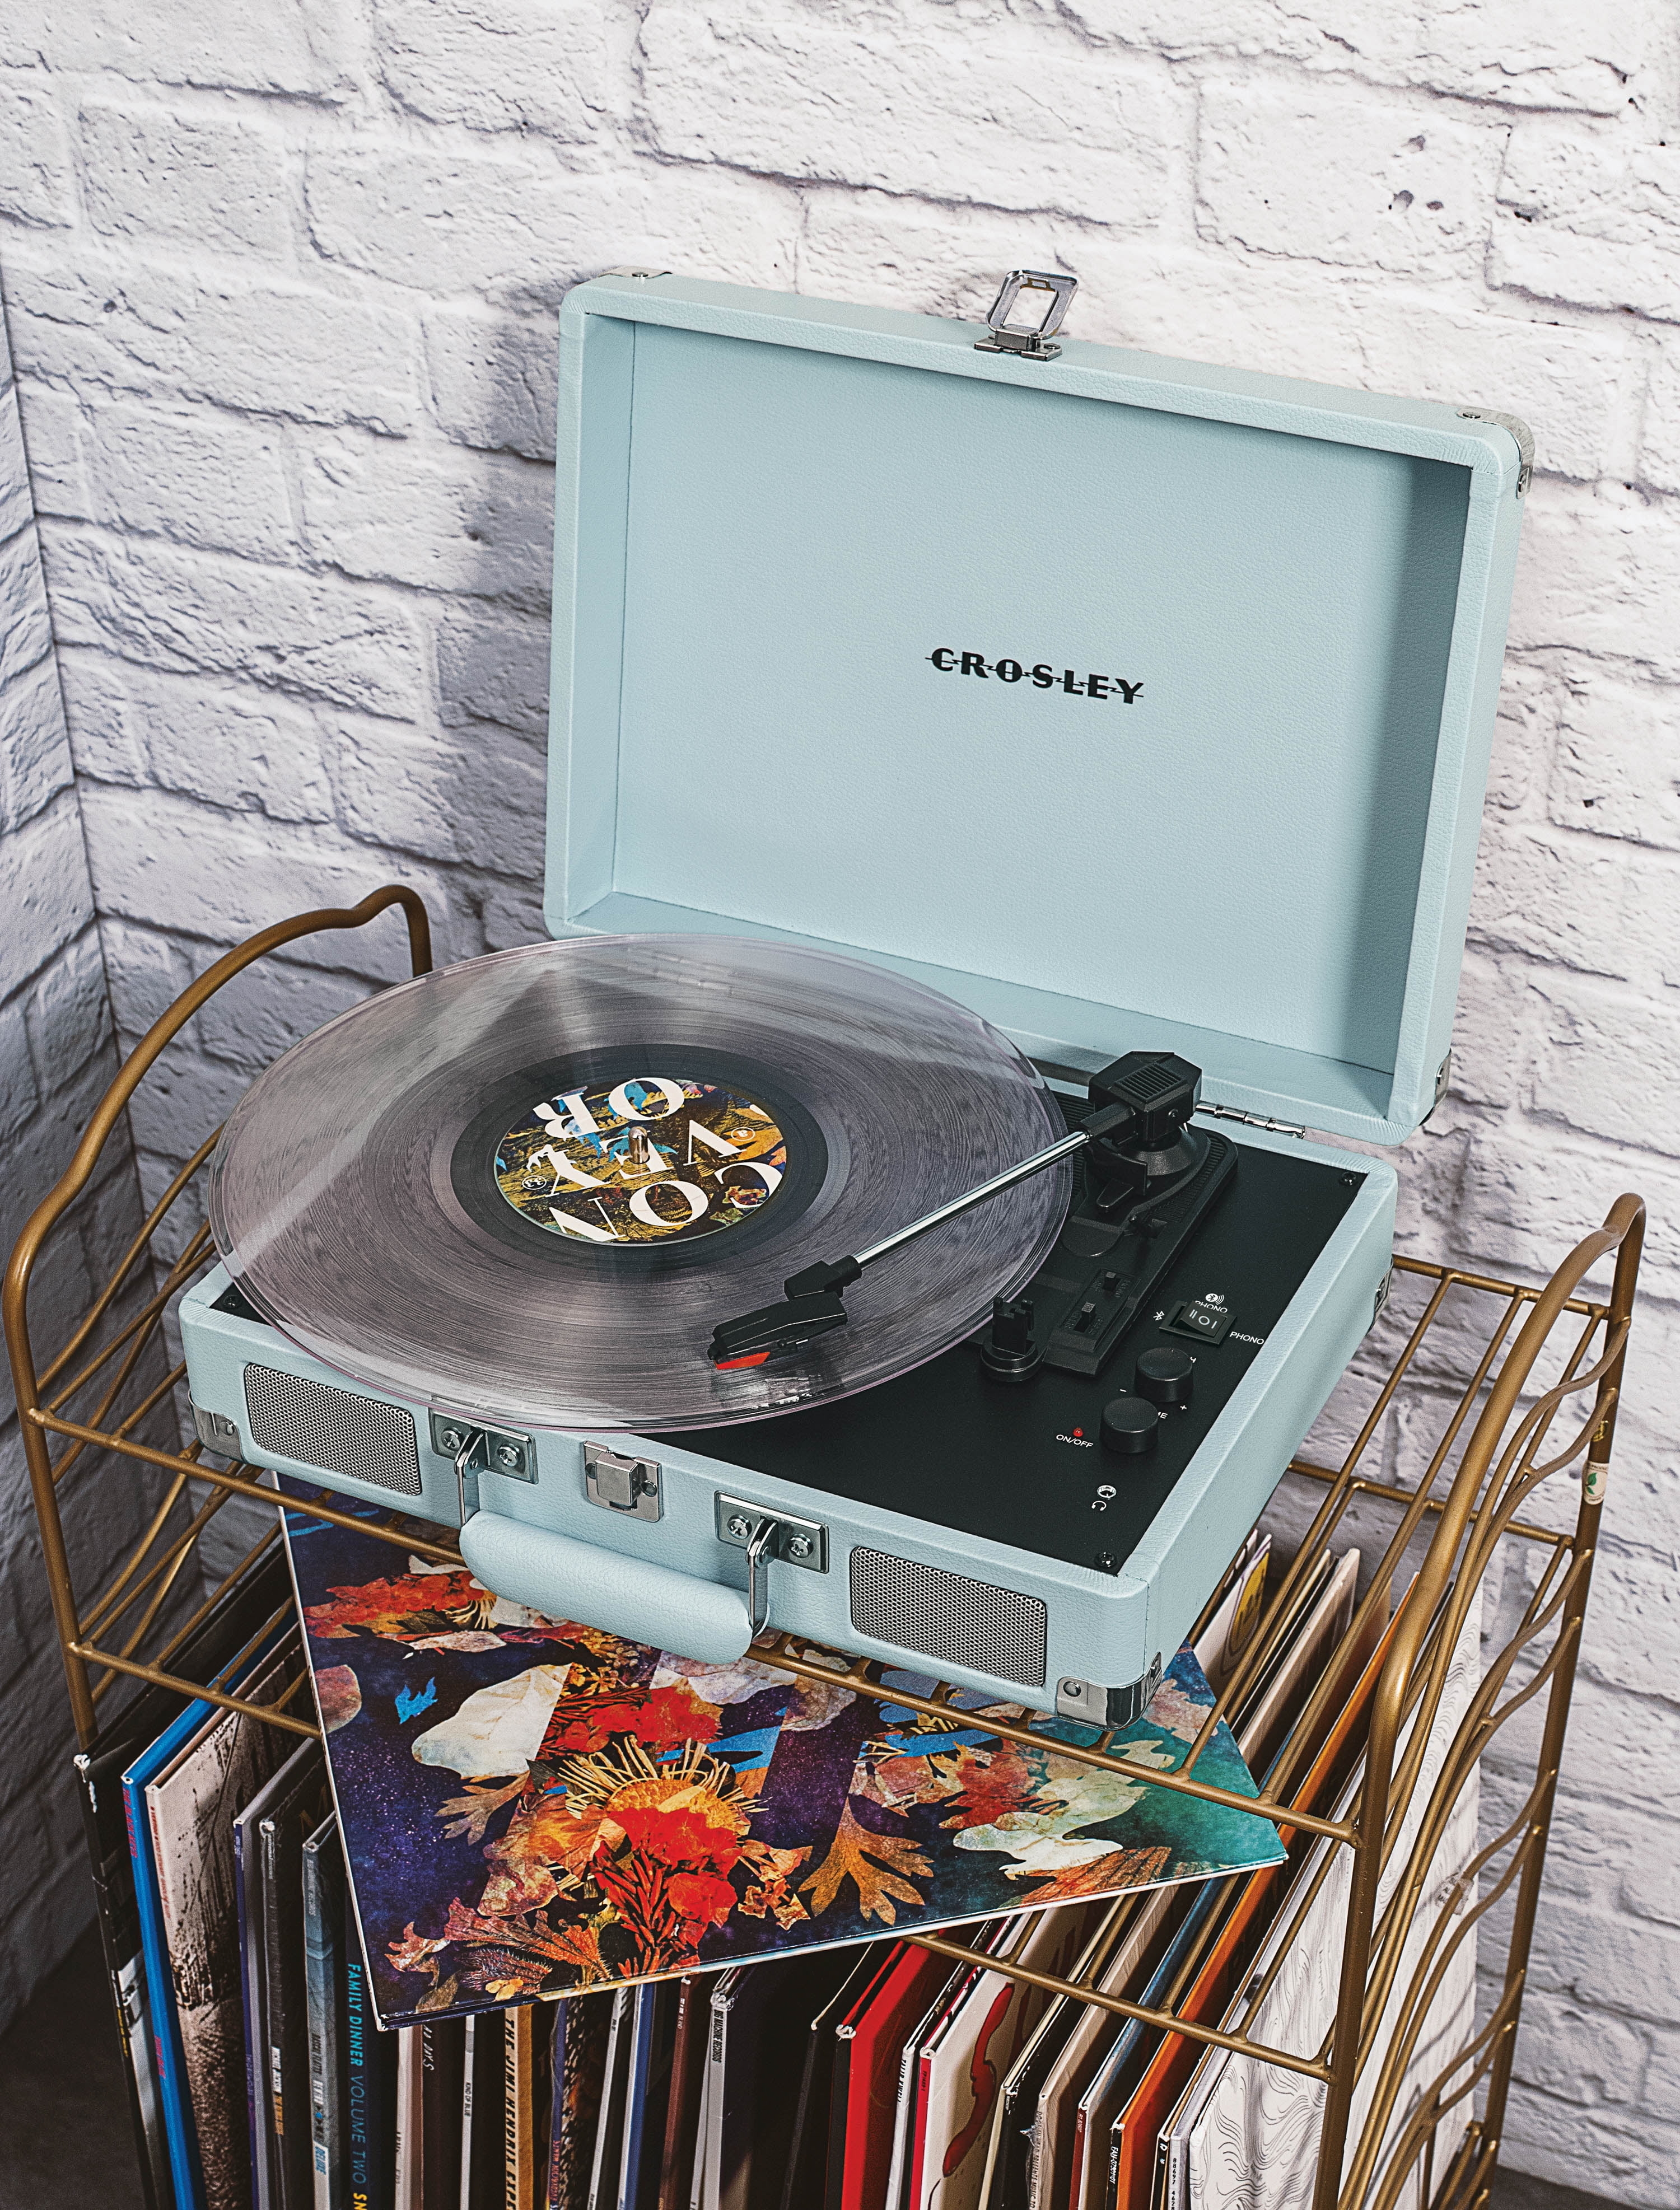 the crosley player with a record on it